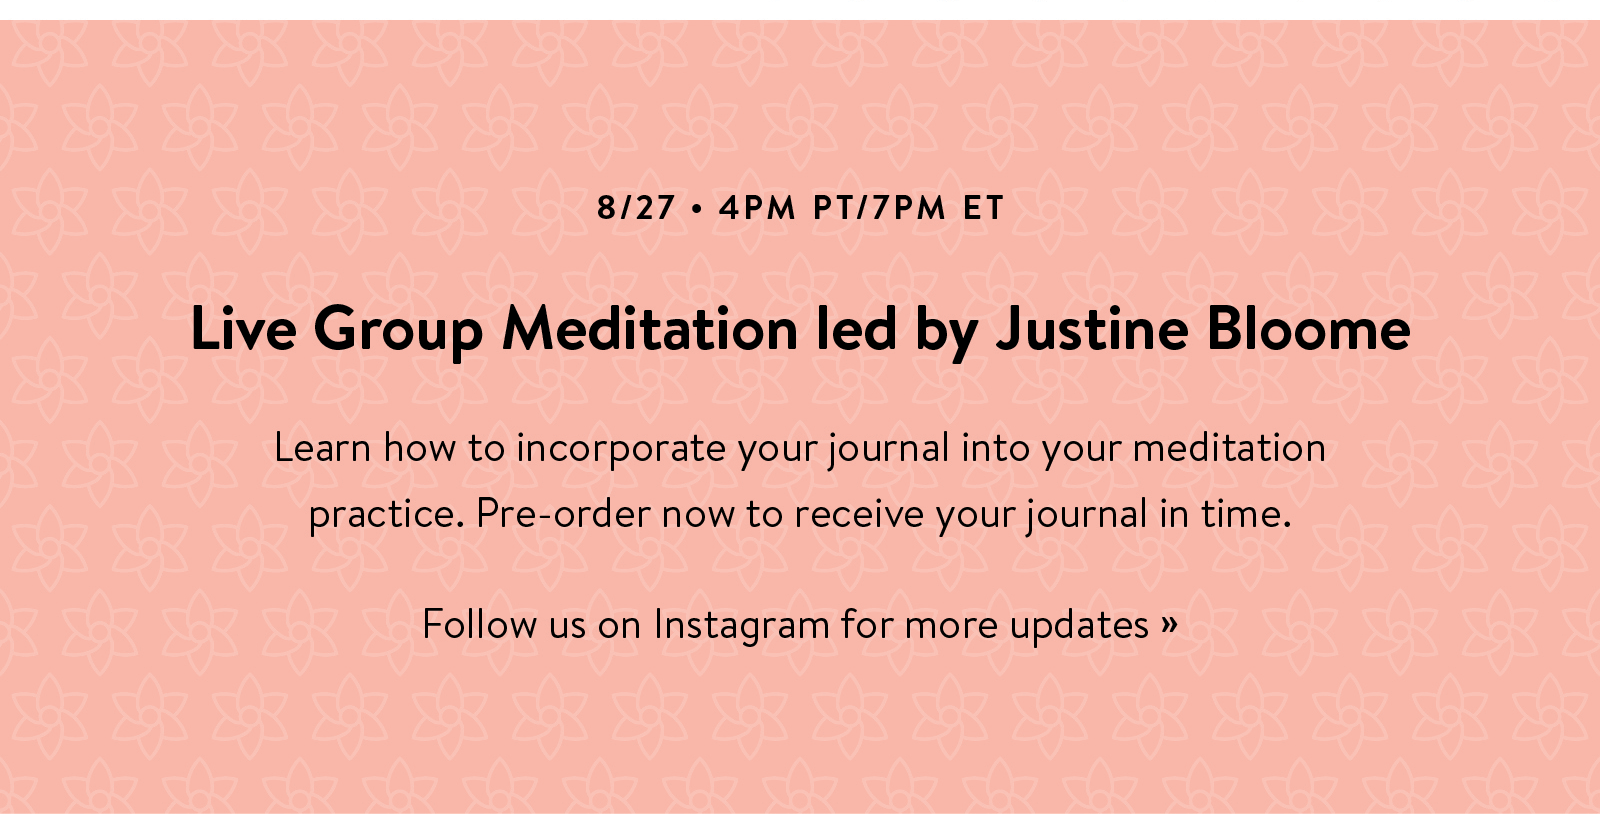 Live Group Meditation let by Justine Bloome. Pre-order now to receive your journal in time. Follow us on Instagram for more updates ?